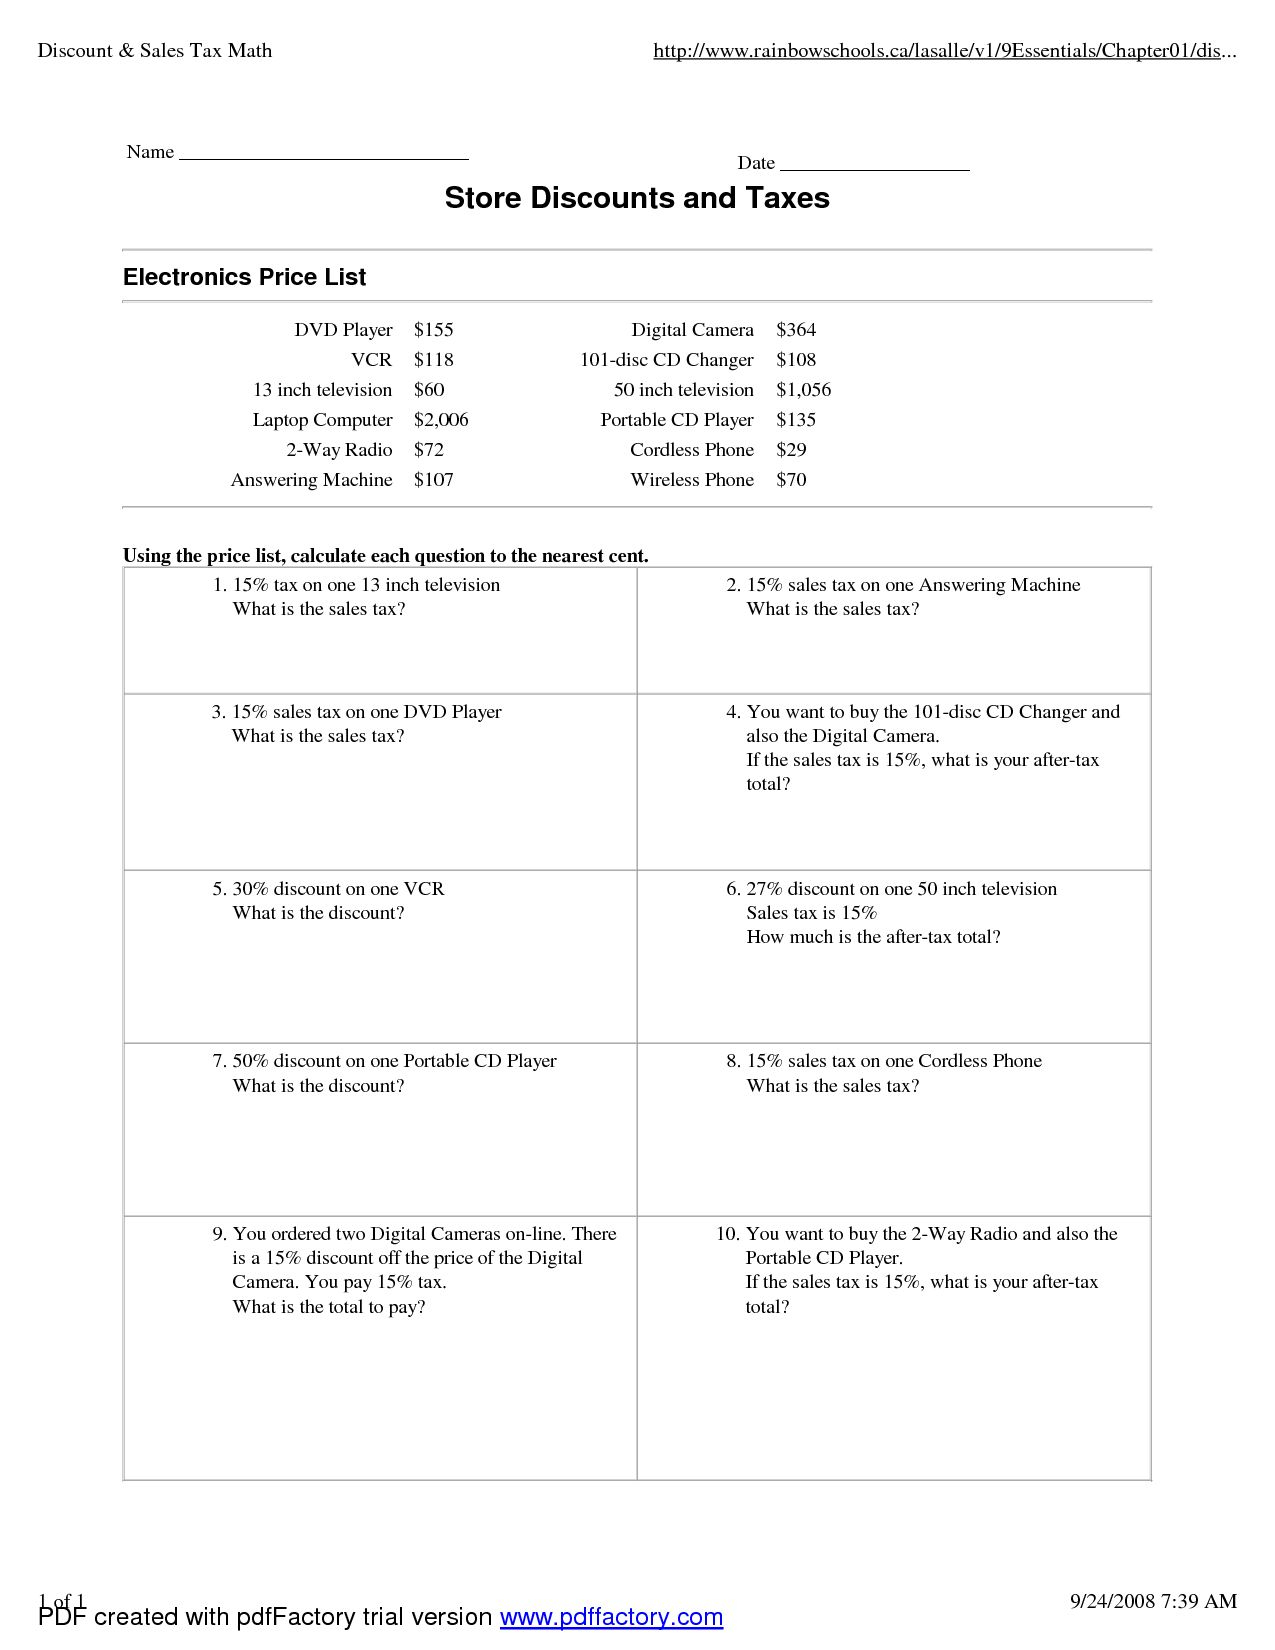 Markups And Markdowns Word Problems Matching Worksheet